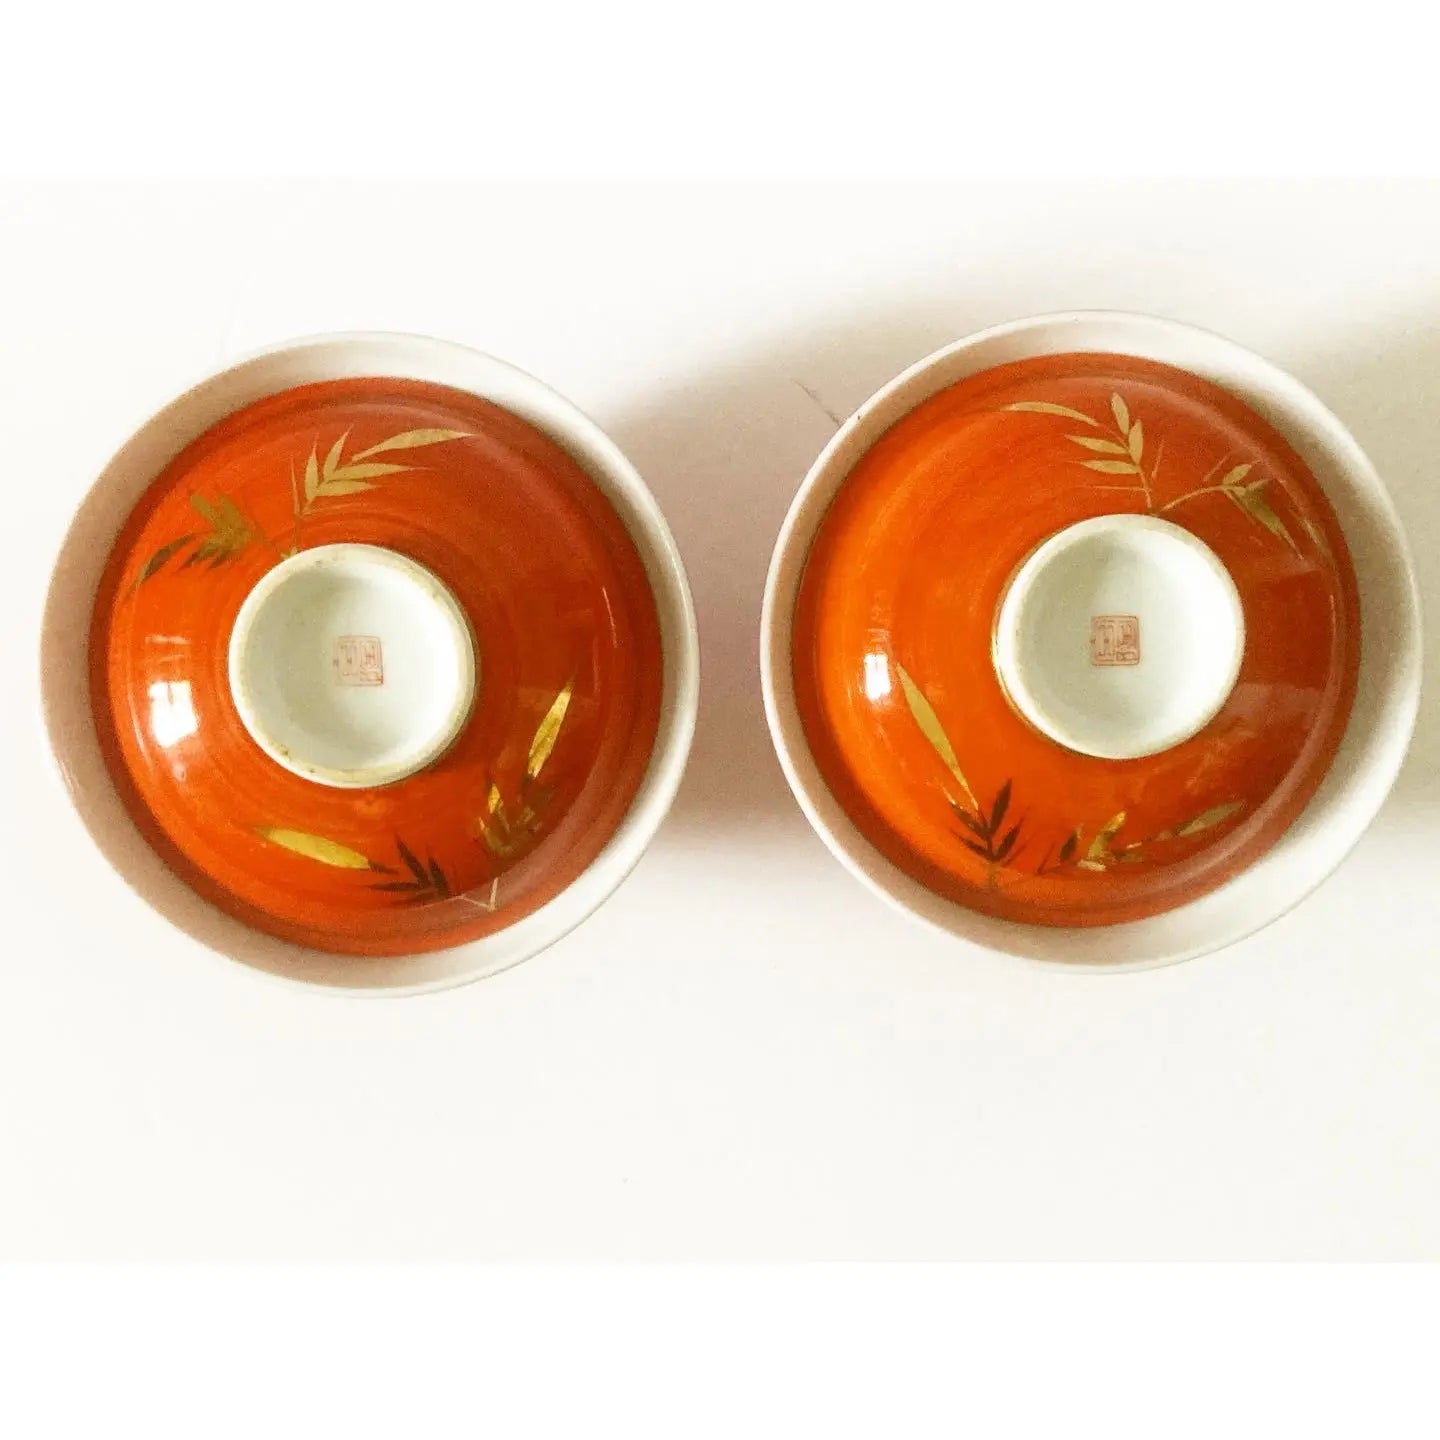 Early 20th Century Asian Rice Bowls With Lids - a Pair